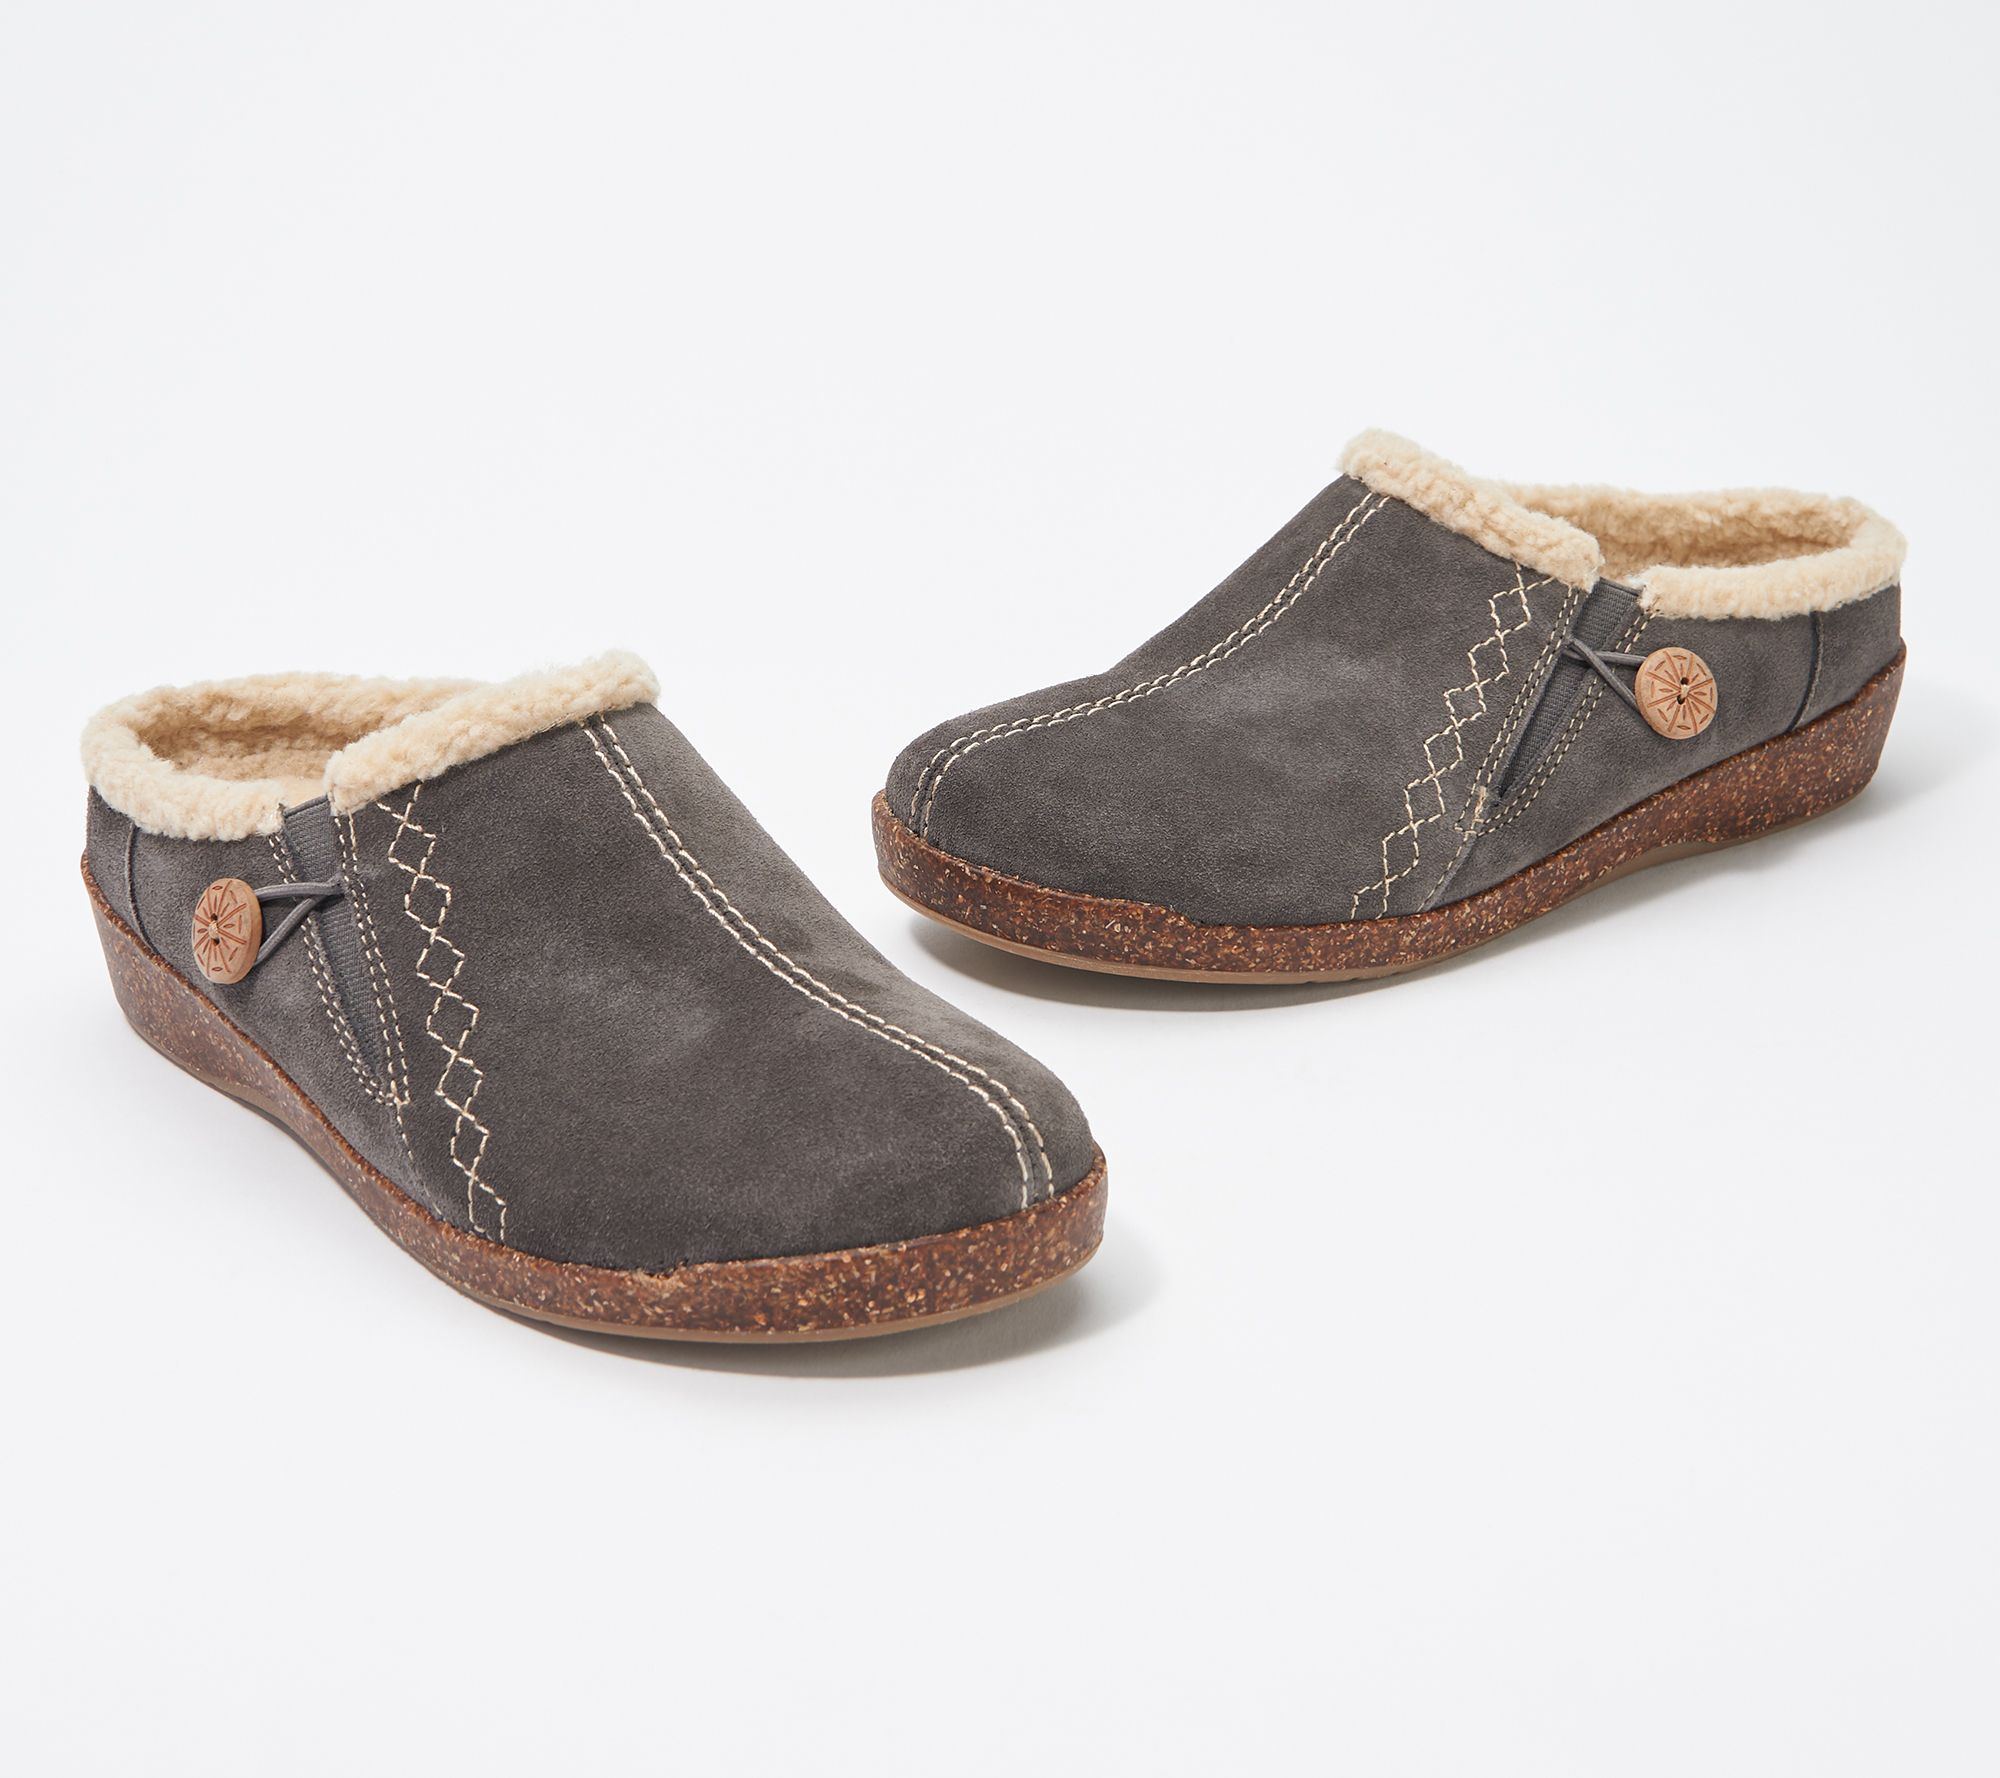 qvc earth shoes recently on air